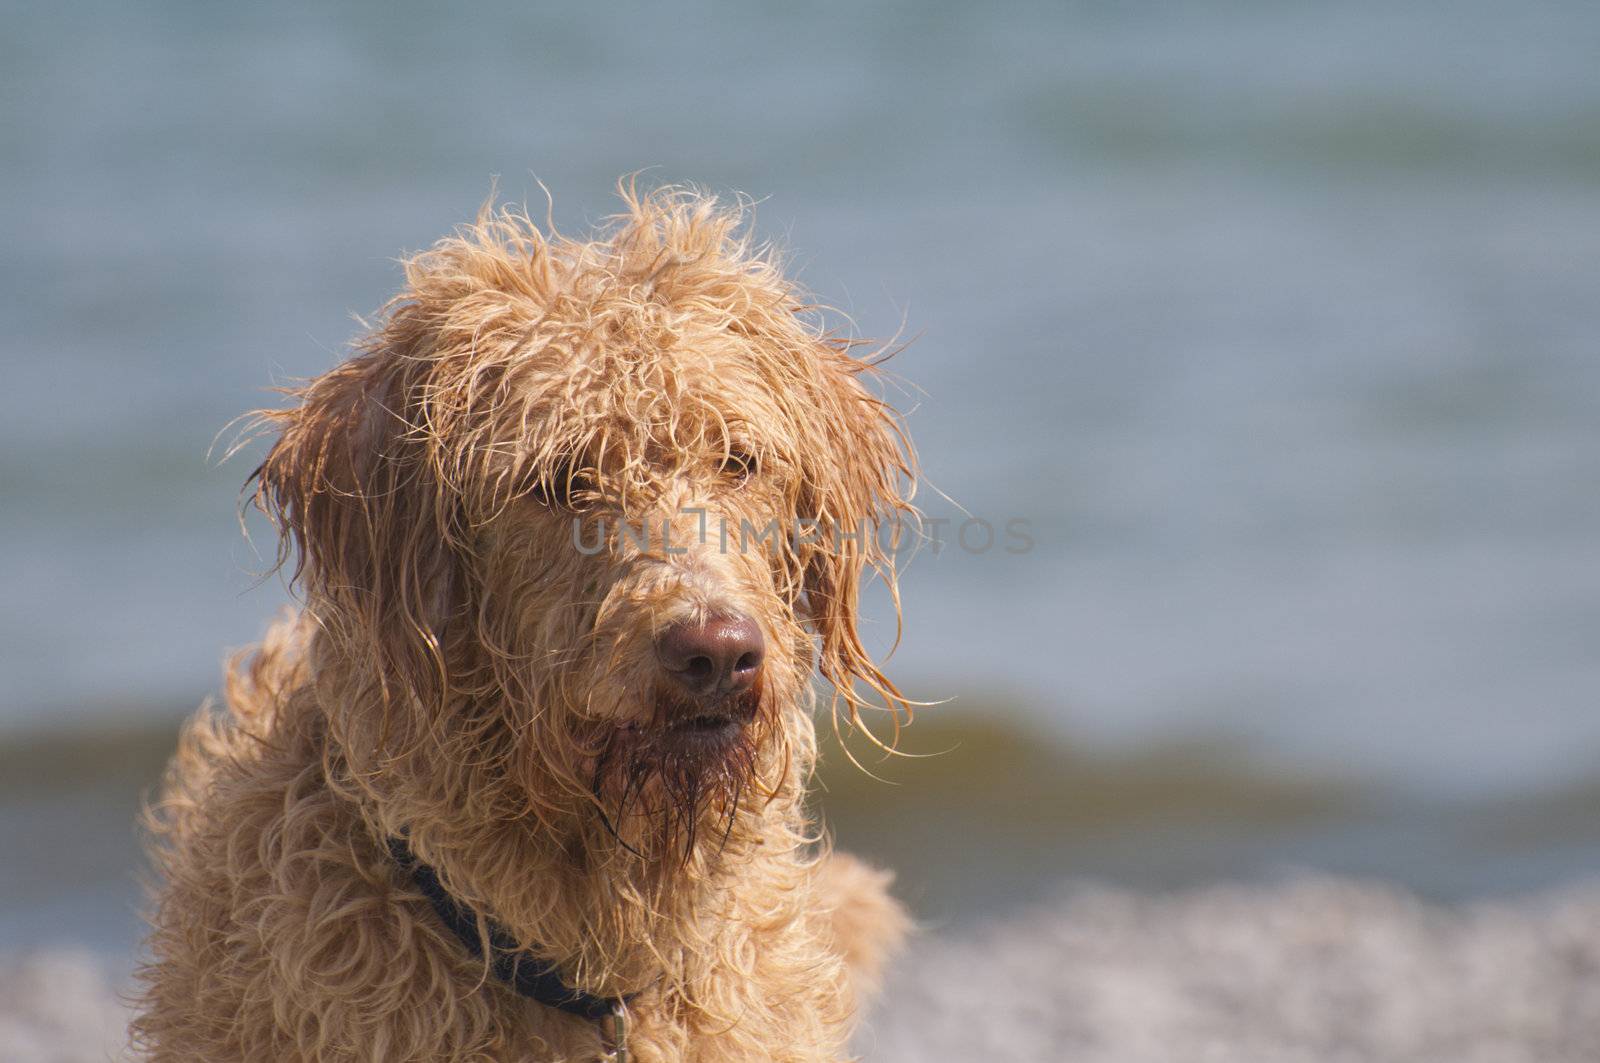 Bad hair day at the beach for this labradoodle dog, selective focus on the waves and water in the background with a copy space area